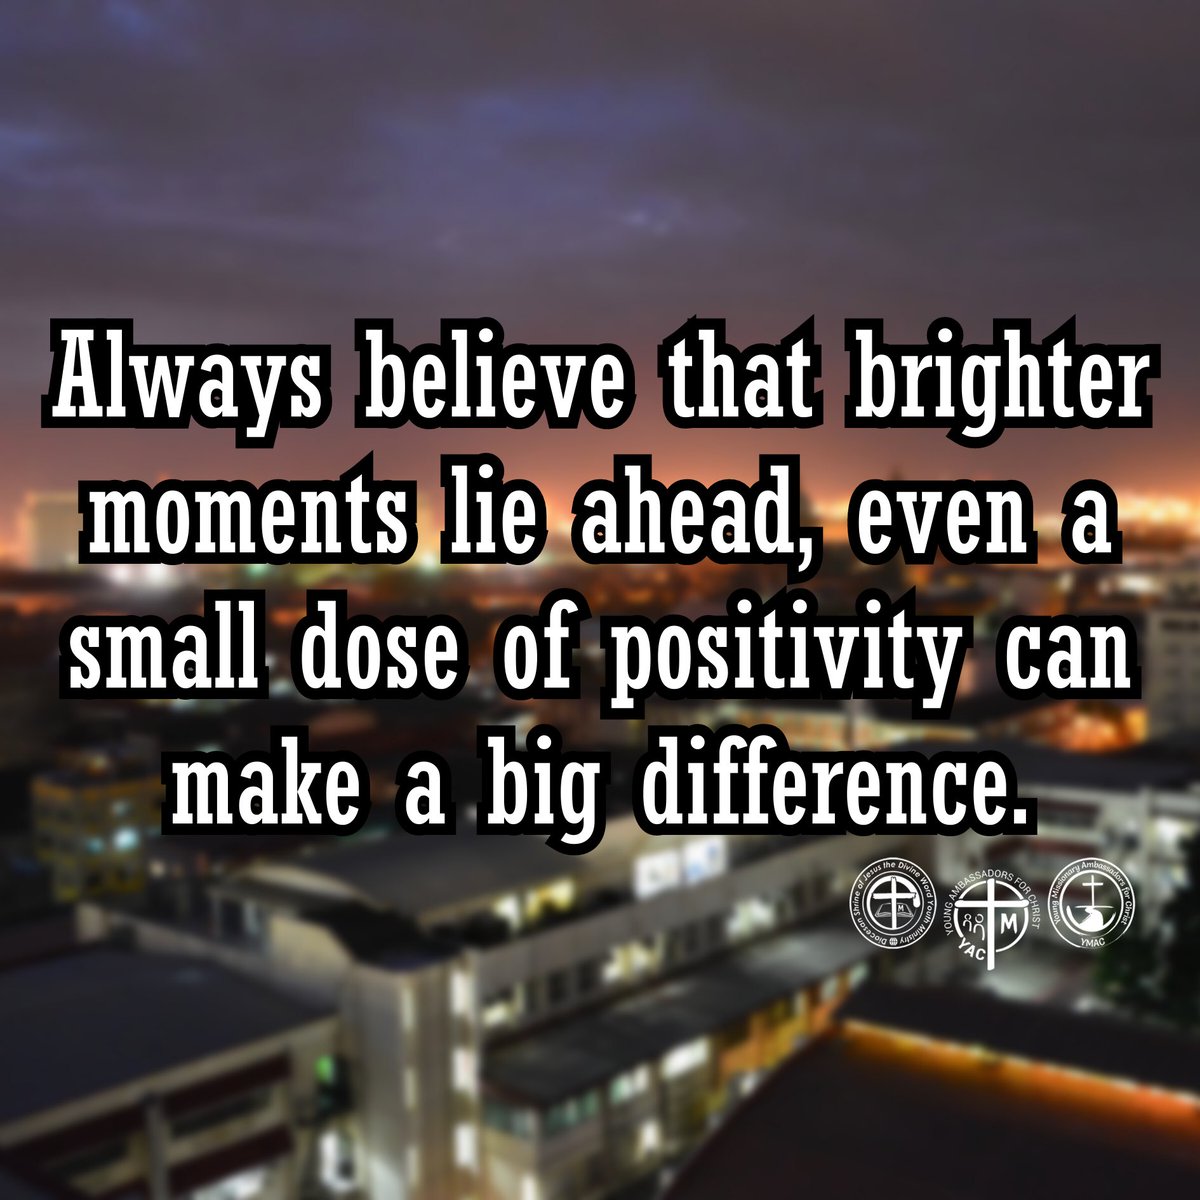 …, even a small dose of positivity can make a big difference.

#SmallStepsBigDifference
#PositiveThoughts #HopeForBetter #OptimisticOutlook #BrighterDaysAhead

***

#YAC #YMAC #SYM #SVDyouth 
#SHRINEyouthMinistry #ShrineYouth
#DrawnToFollow #PromoteTheGospel